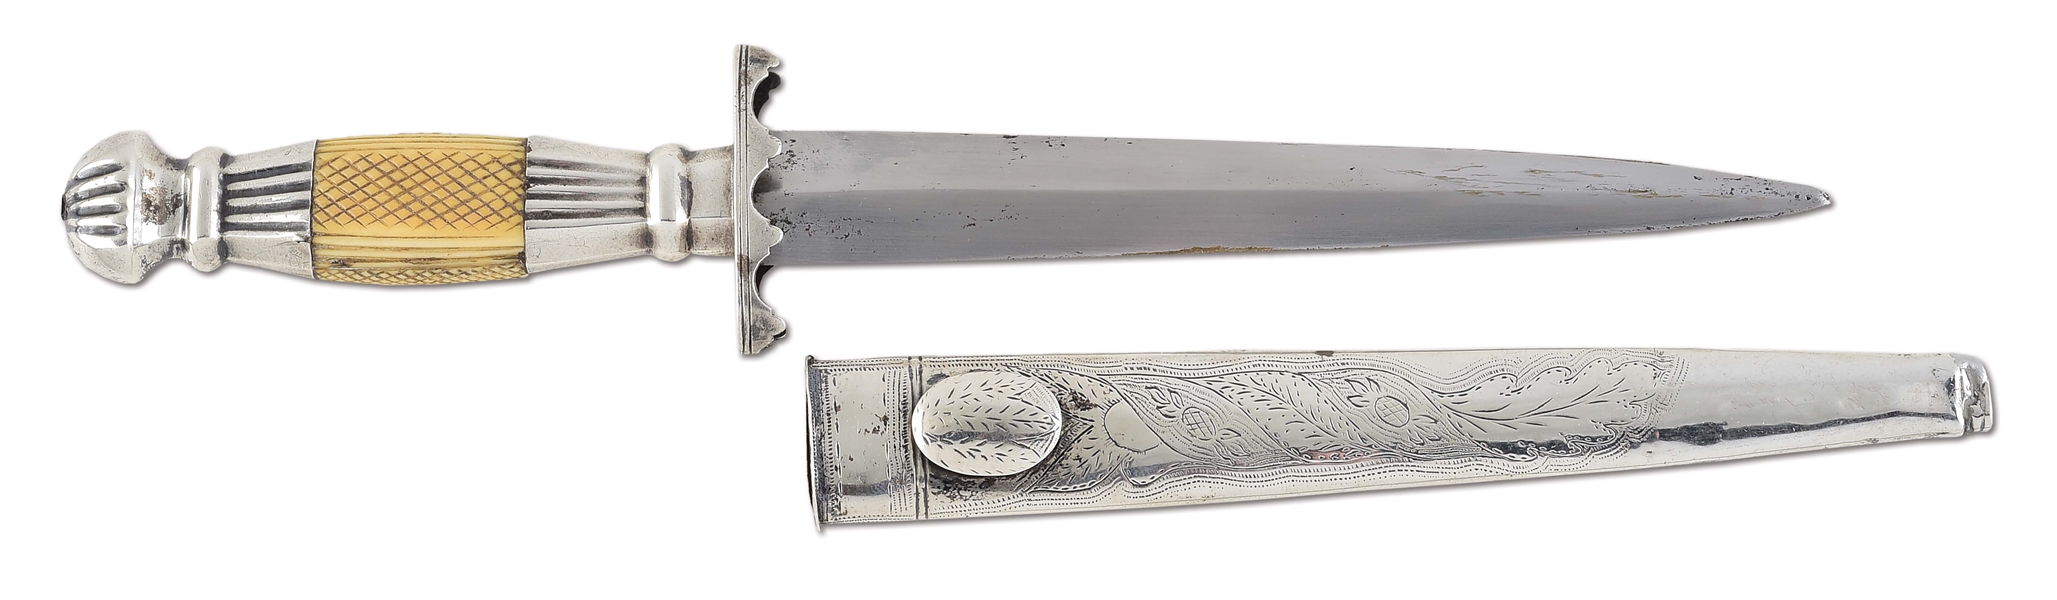 AMERICAN SILVER-MOUNTED NAVAL DIRK WITH SCABBARD.